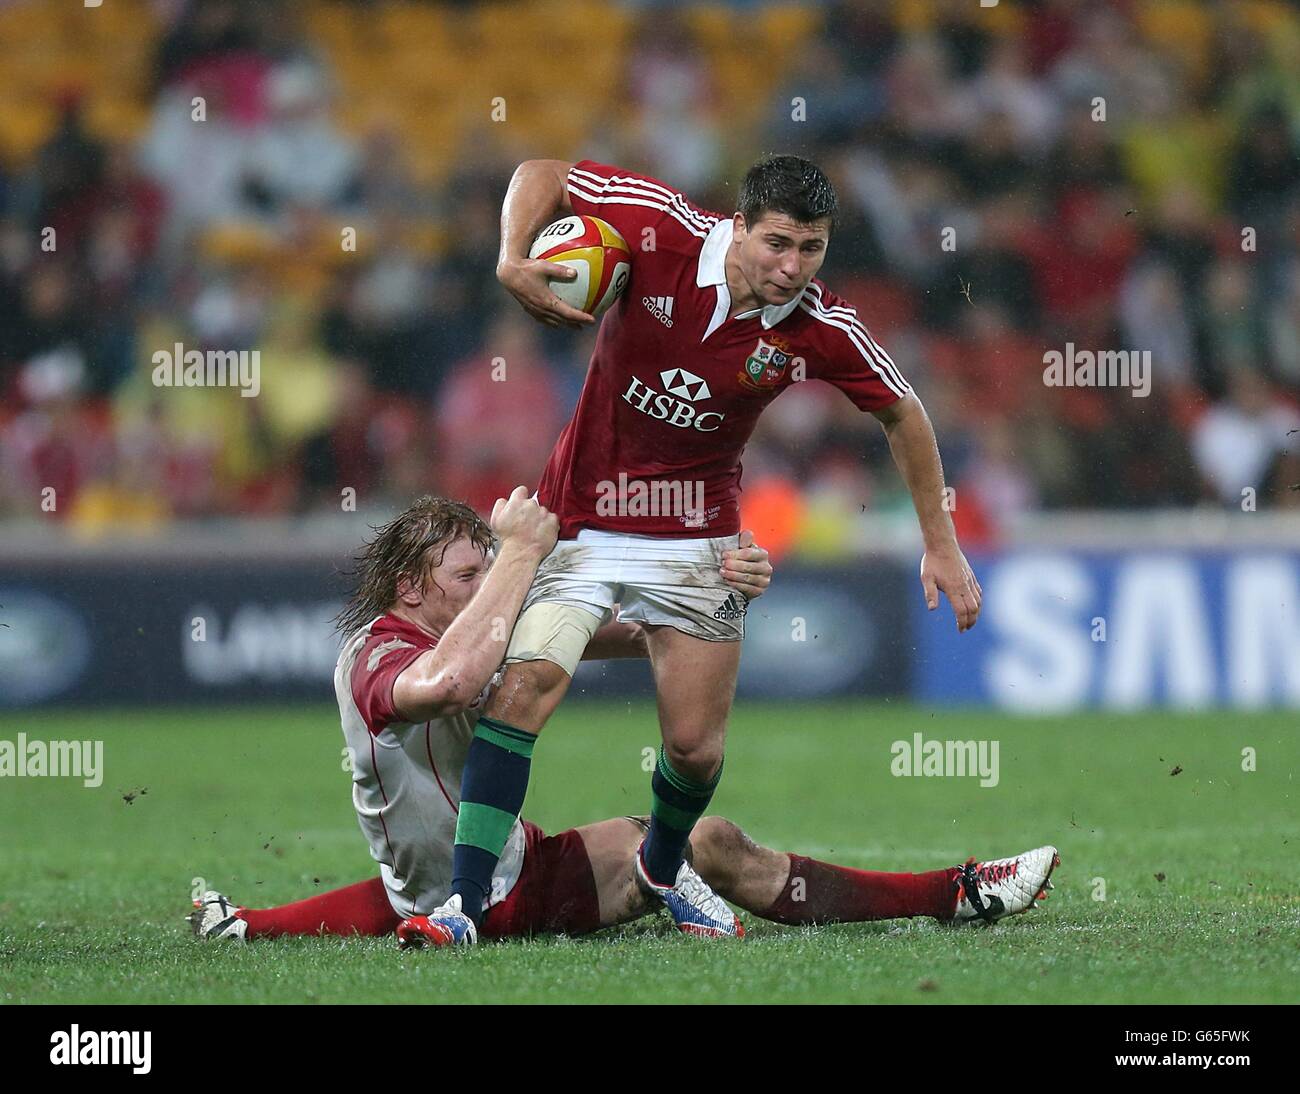 British and Irish Lions' Ben Youngs is tackled by Queensland Reds' Ed Quirk Stock Photo